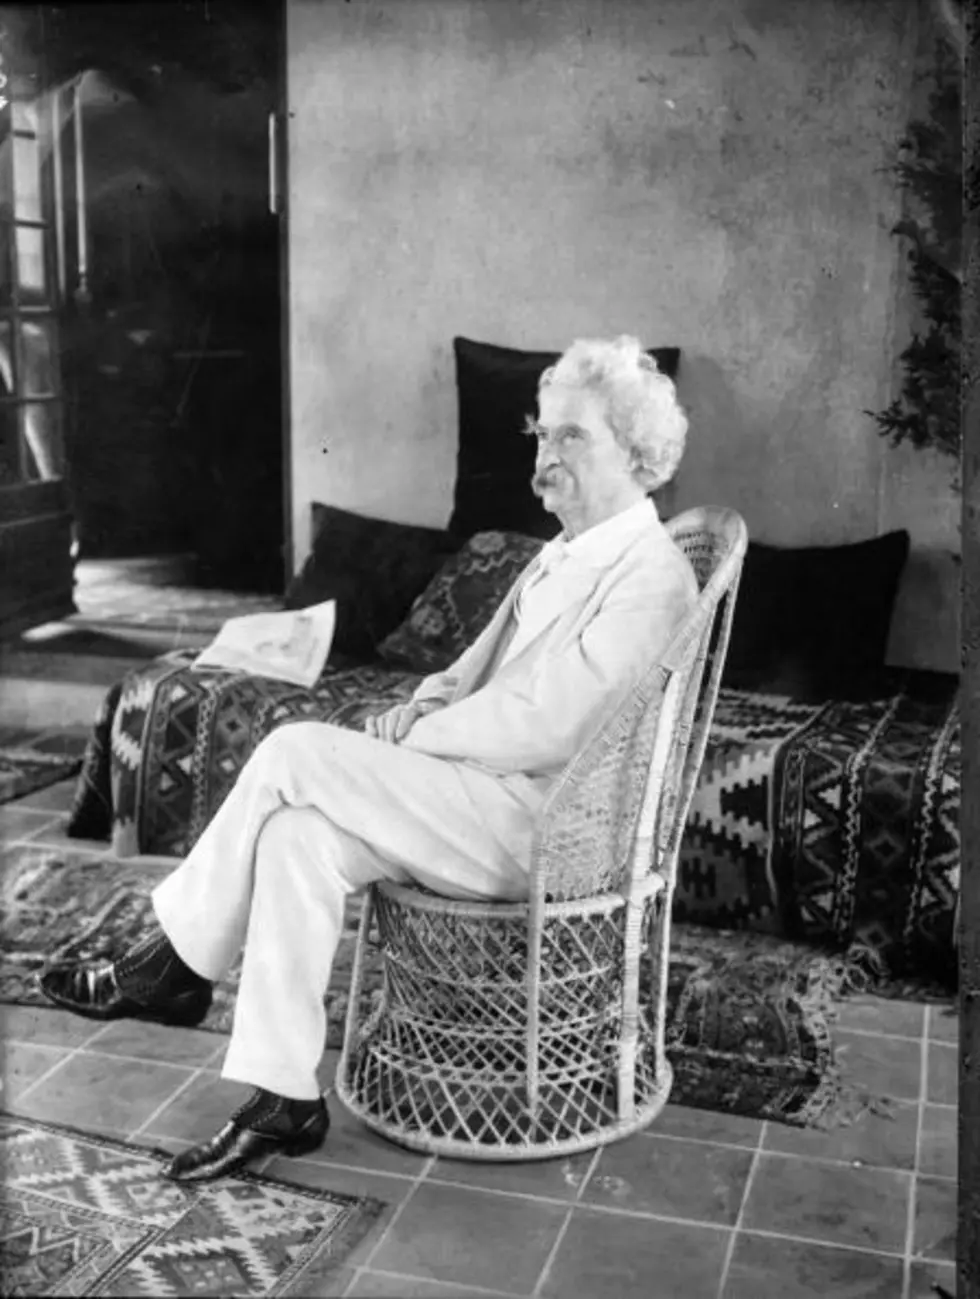 Greg’s Grill Thoughts From Mark Twain